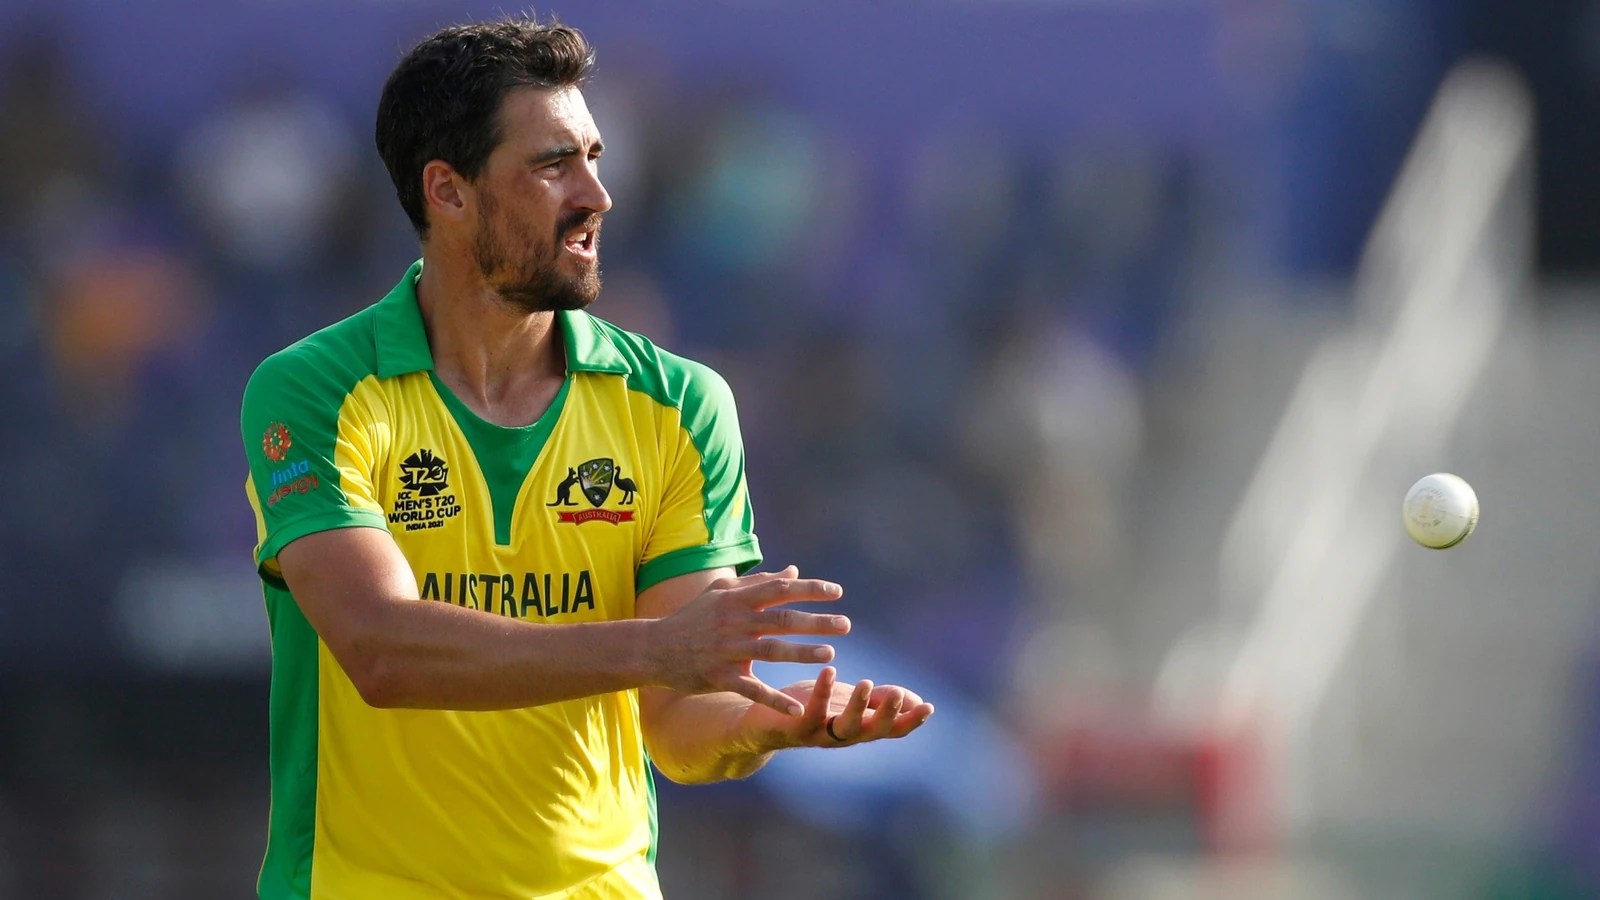 Mitchell Starc T20 Retirement: After David Warner's Test Retirement warning, Star hints at white-ball retirement